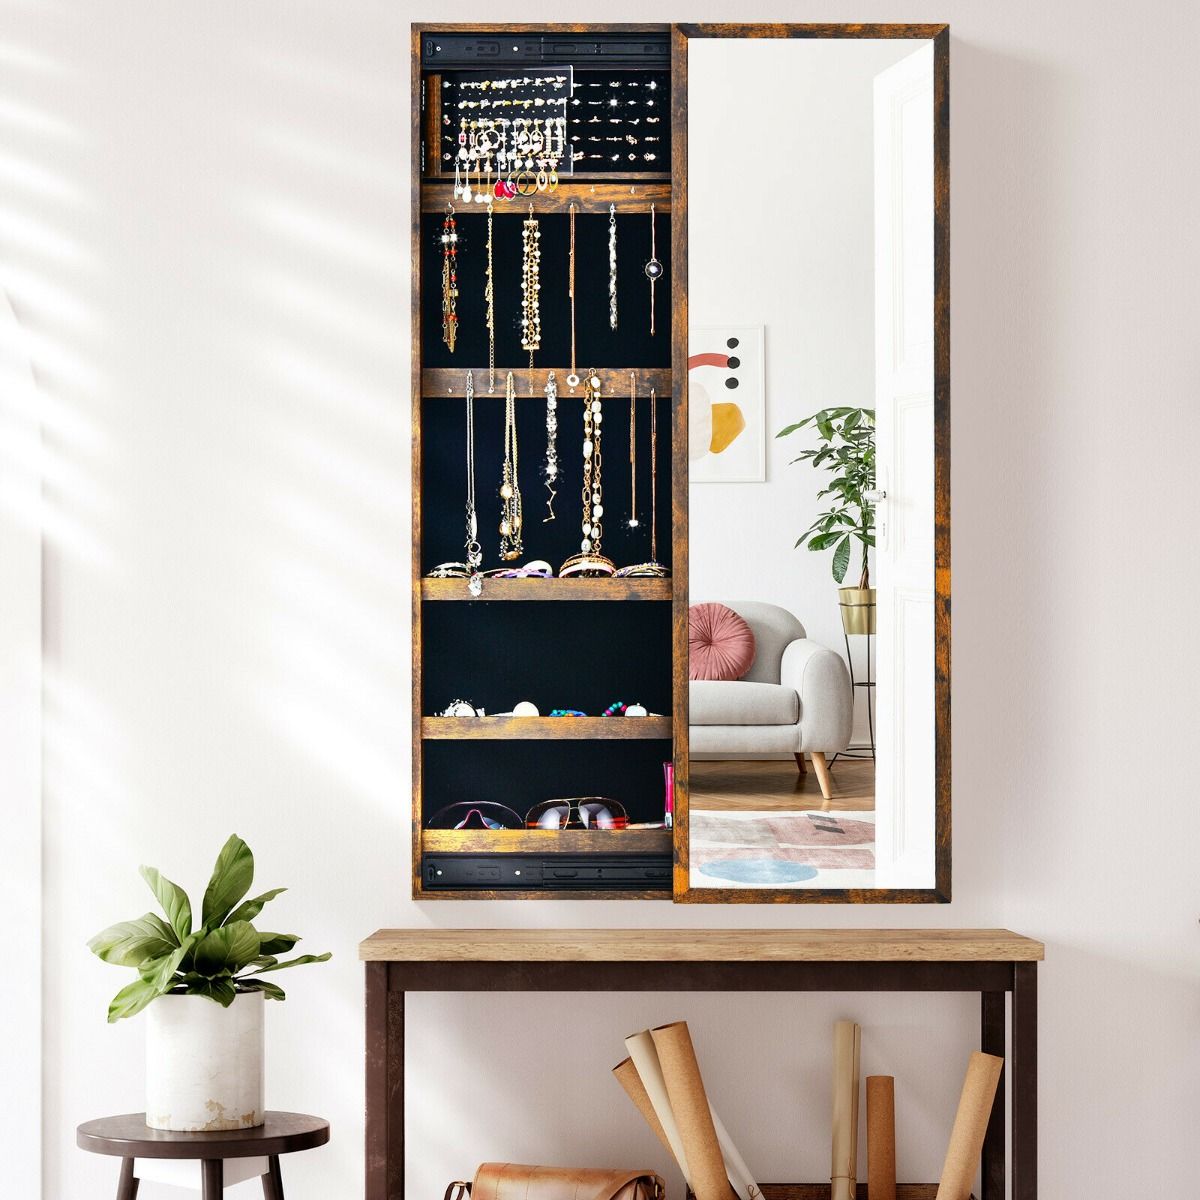 Wall-mounted Jewellery Storage Cabinet with Full-Length Mirror